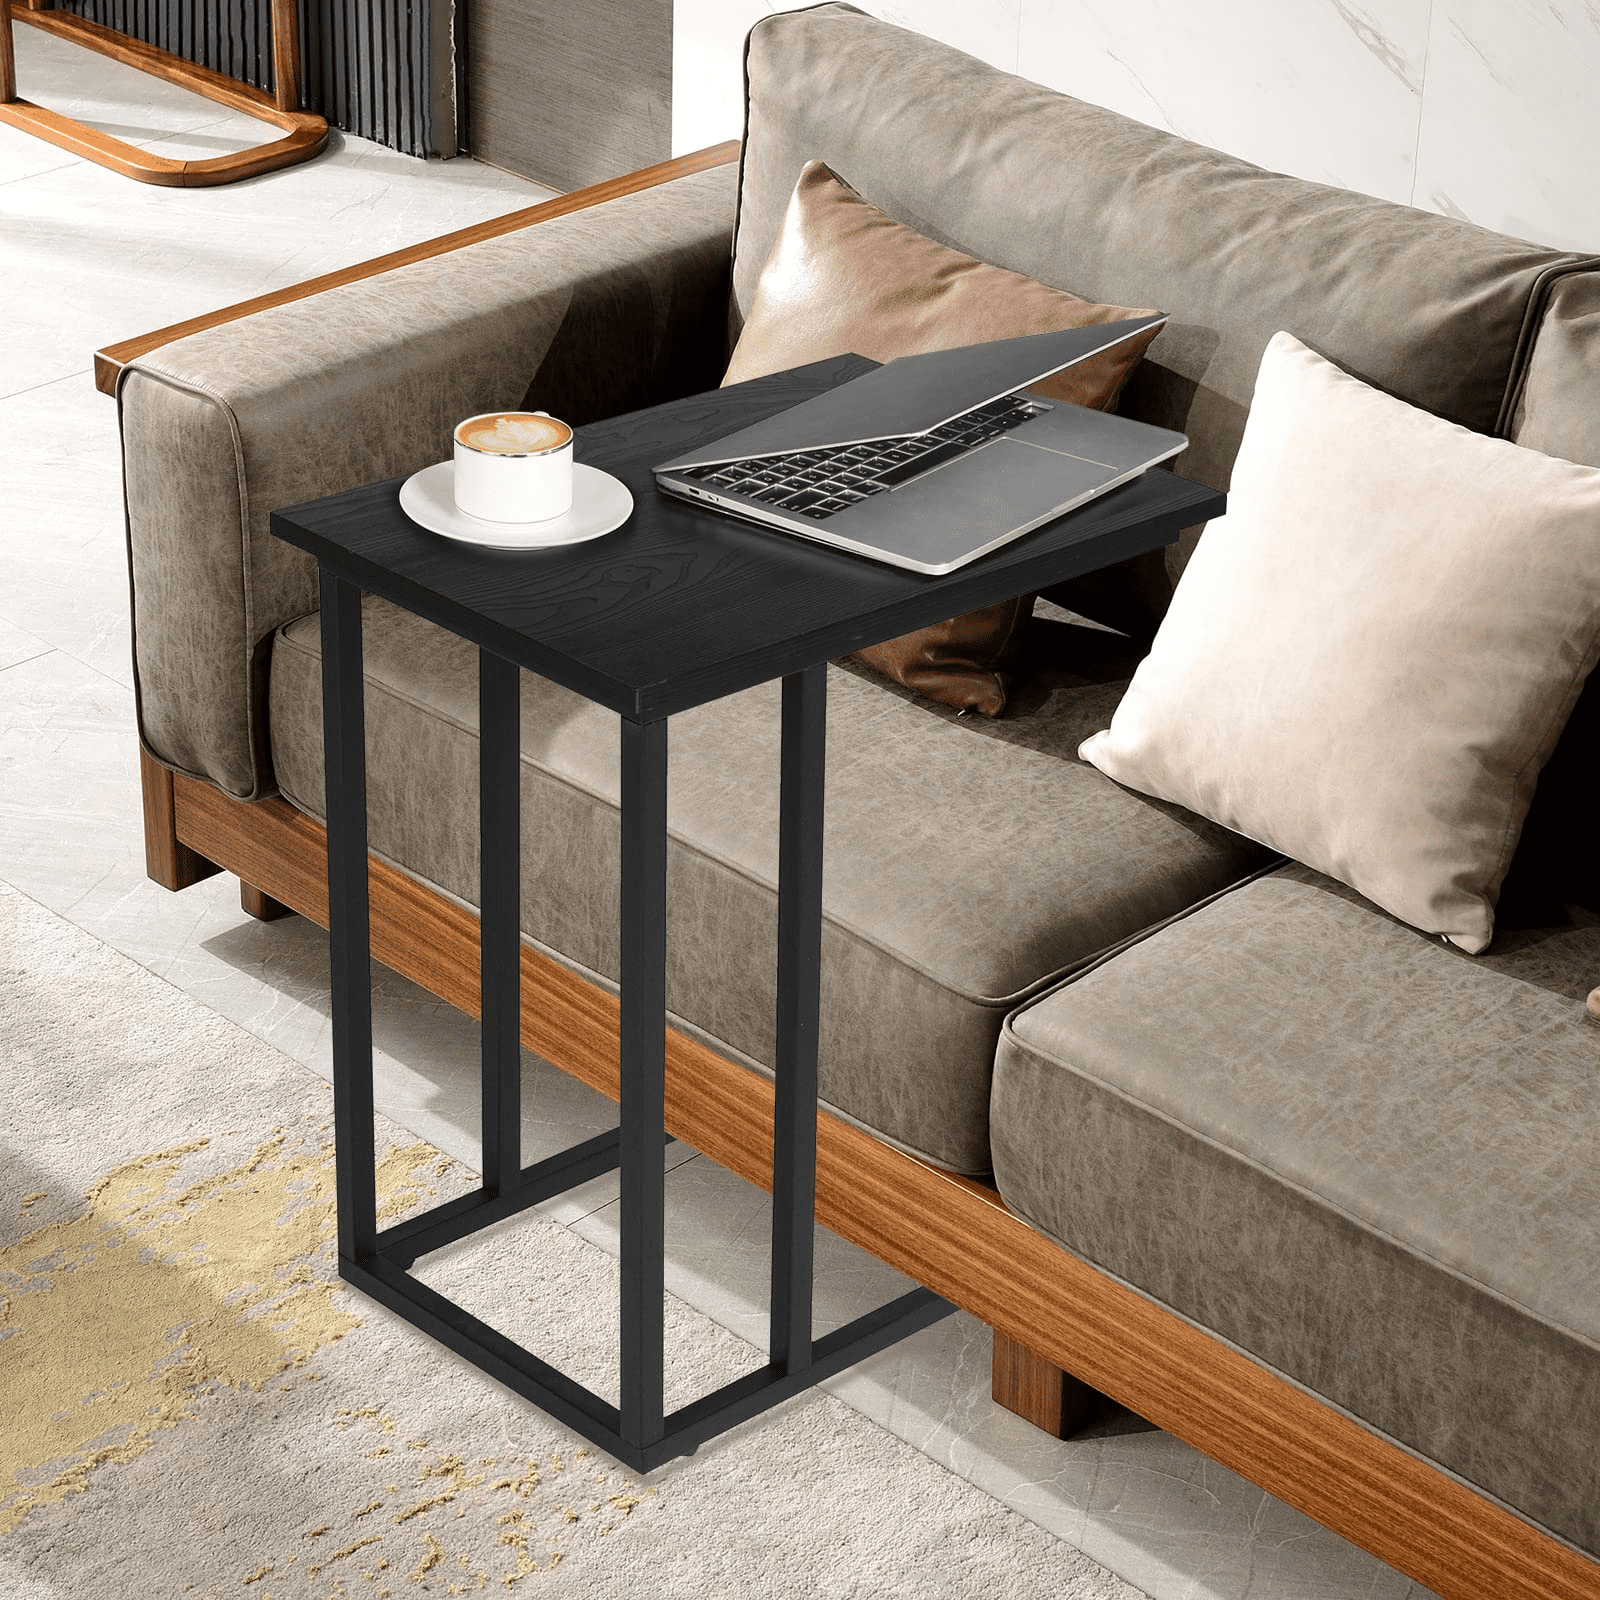 Wood Finish Steel Construction 26-Inch Sofa Side End Table Bedroom,Balcony Coffee Snack Table Industrial C Shape Table for Living Room Office Small Space 